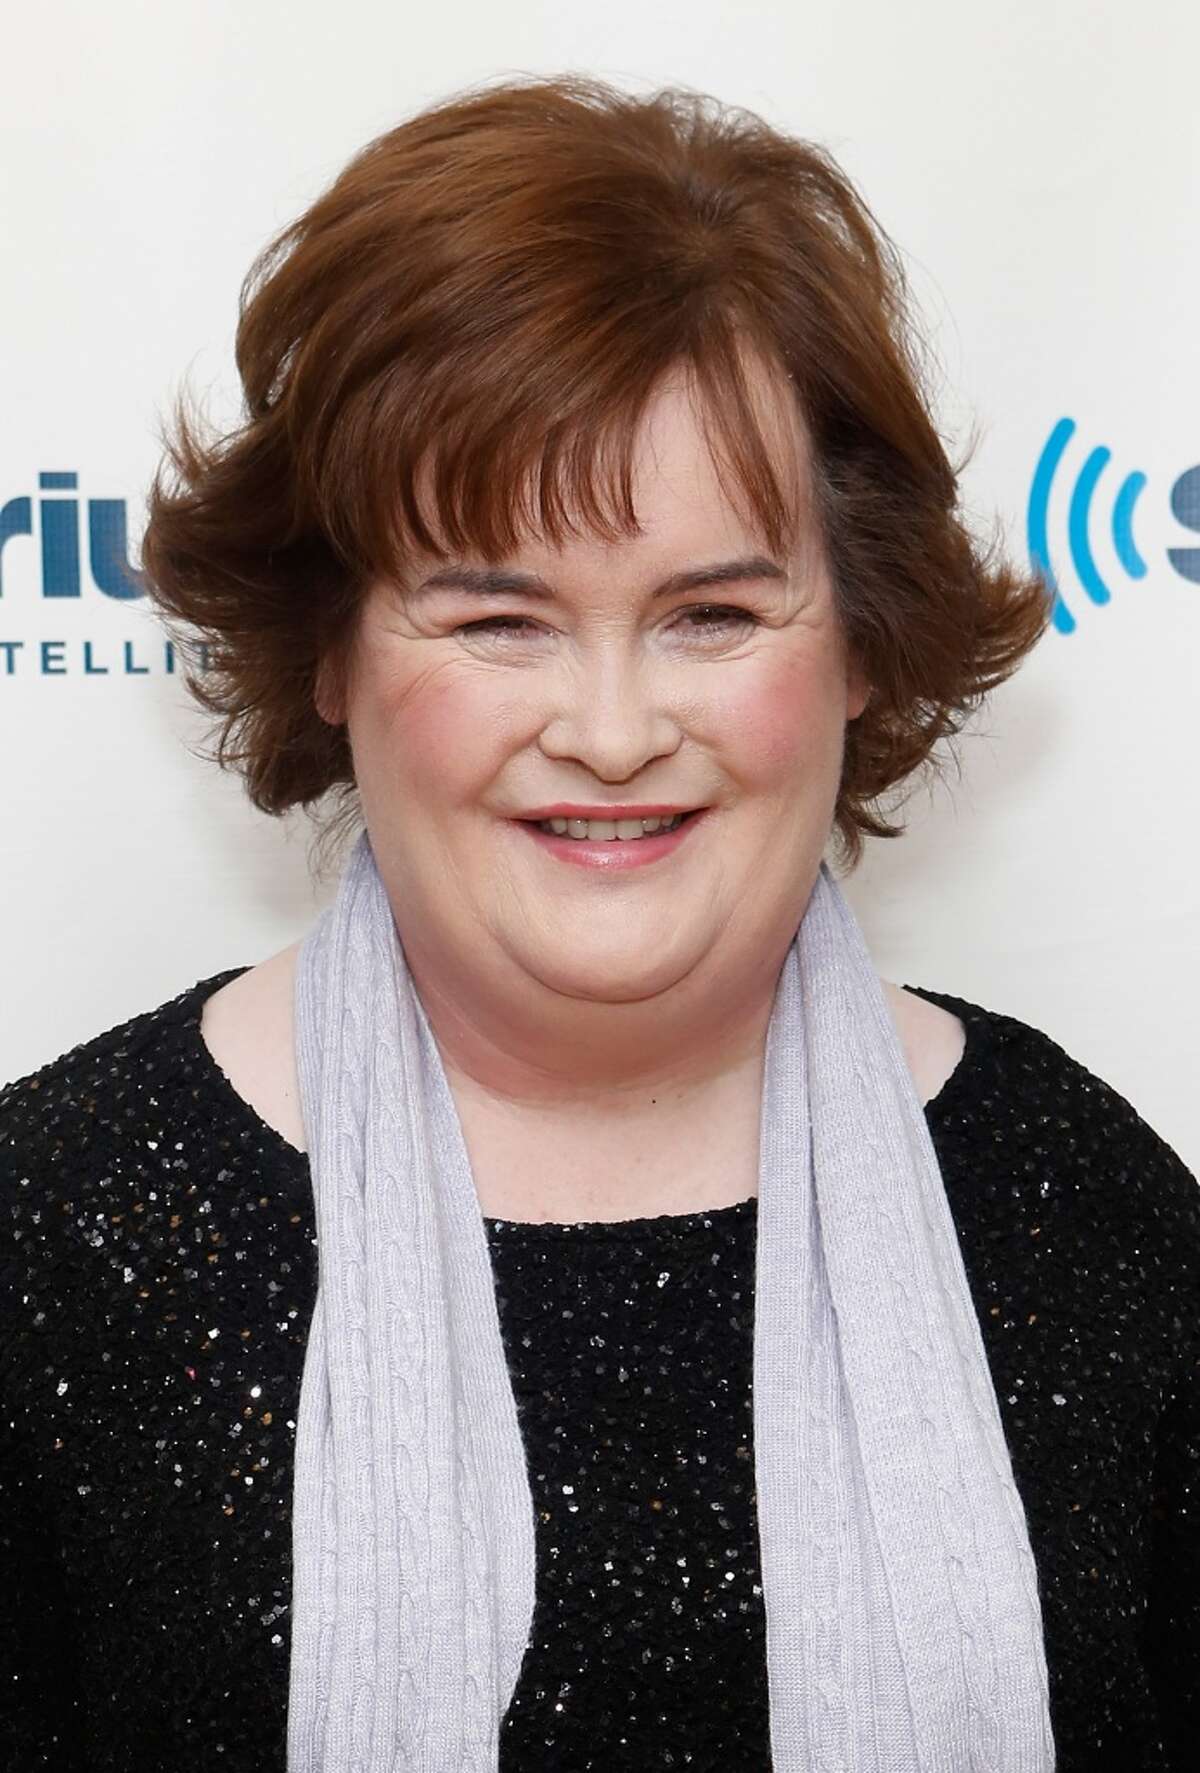 Susan Boyle Boyle, who tore up "Britain's Got Talent" in 2009, didn't find out she was on the spectrum until after her success.